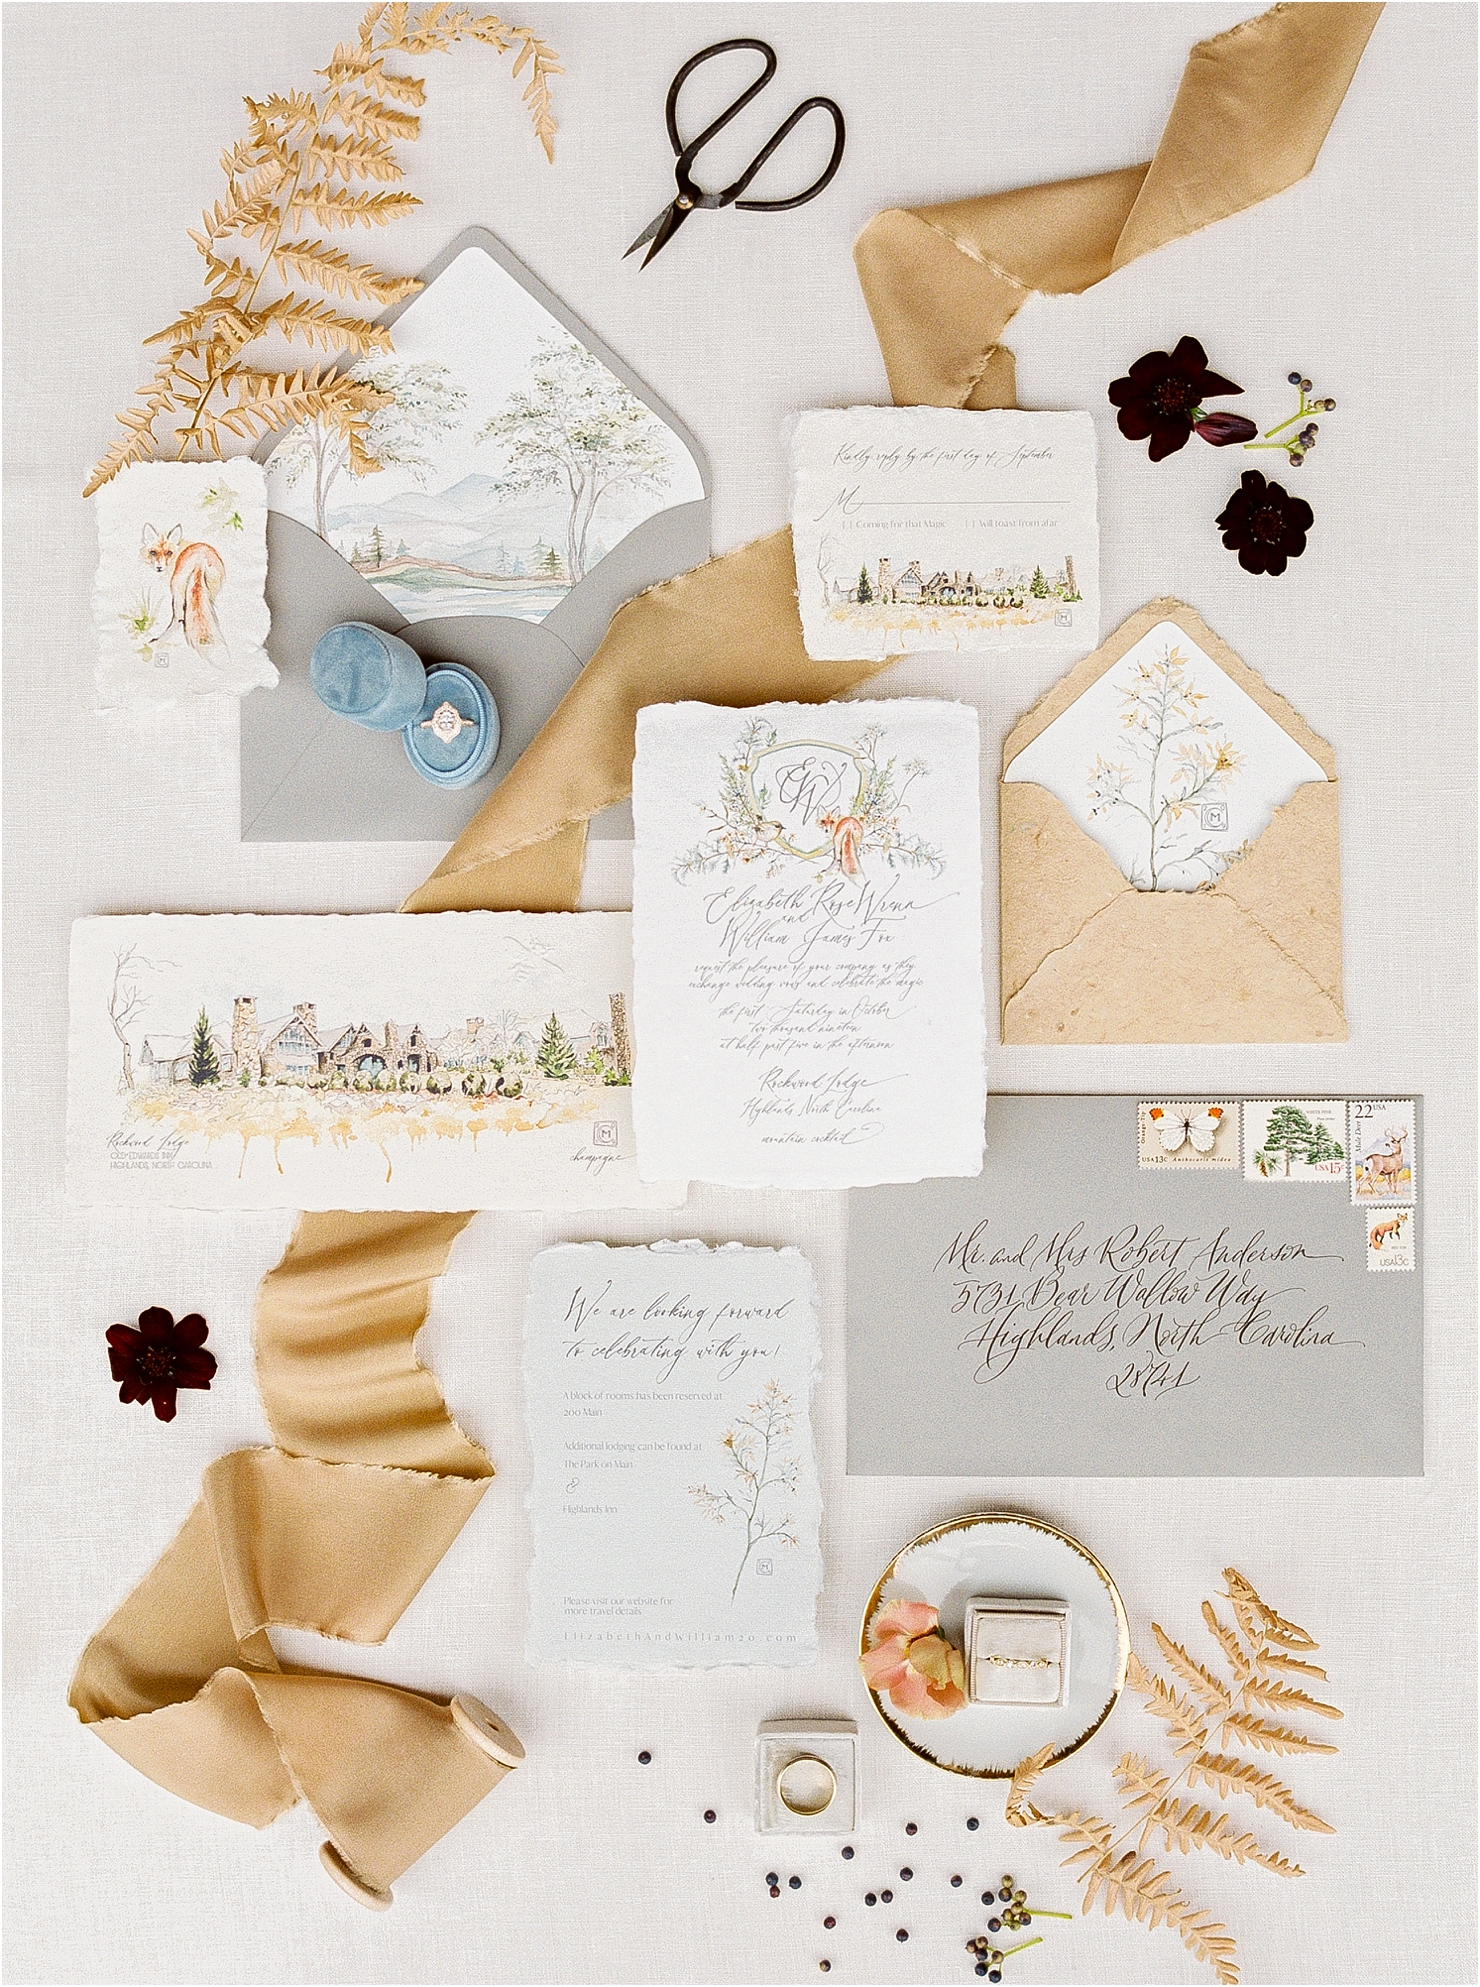 Old Edwards Inn Wedding Photographer Highlands, NC Madeline Trent Romantic Film Fine Art Luxury Photographer Champagne Maker French Calligraphy Deckled Hand Torn Paper Invitation Suite Half-Mile Farm Rockwood Lodge Editorial Wedding Sparrow 